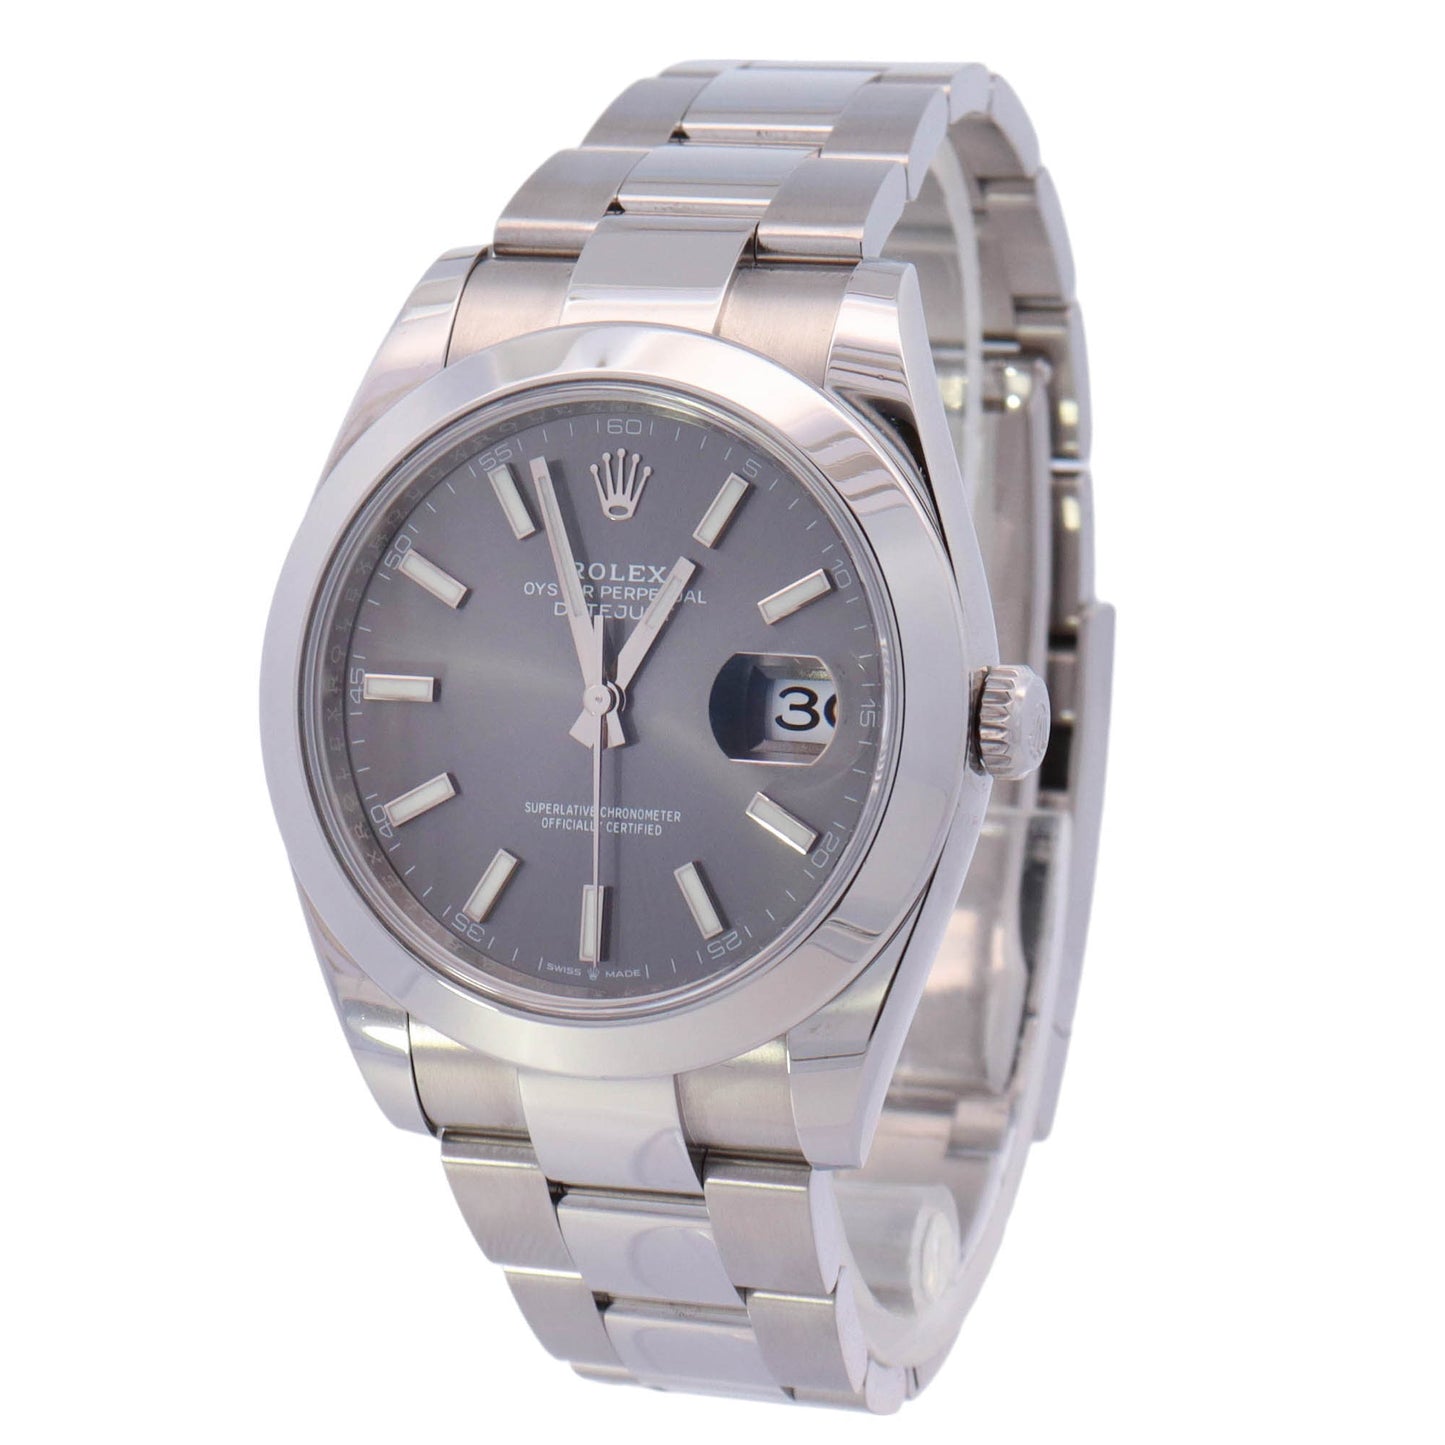 Rolex Datejust Stainless Steel 41mm Rhodium Stick Dial Watch Reference# 126300